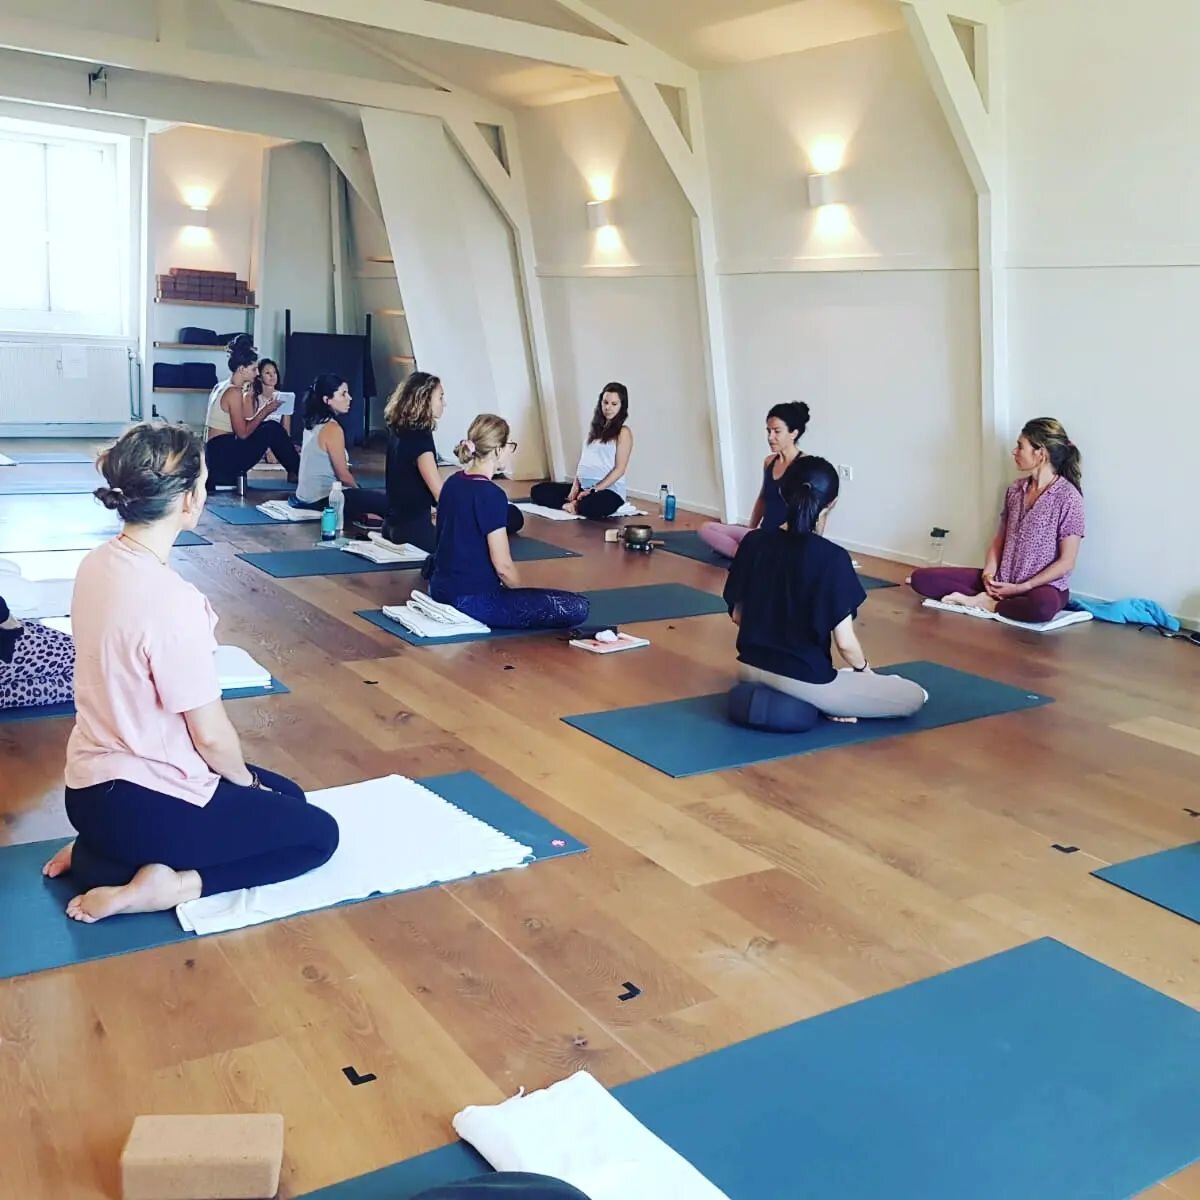 I am offering an urban retreat week in August to deepen your knowledge of your own yoga practice and how to share it with others.
It is in Weesp in the beautiful @yogatoday_weesp
19-25 August and there is a generous discount since a few spaces opened